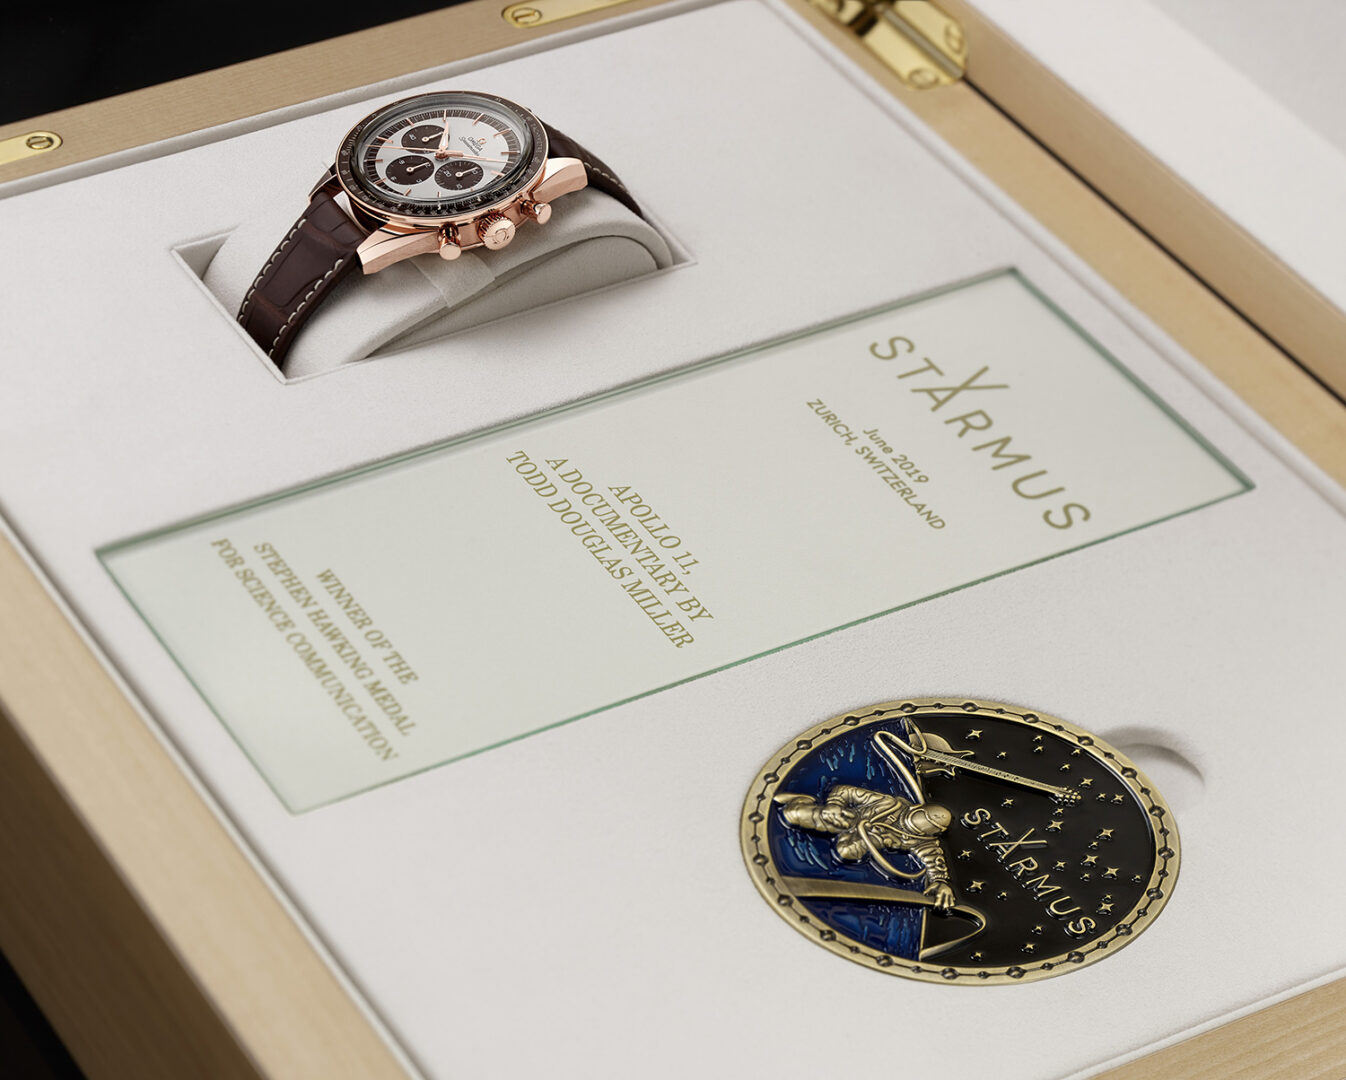 OMEGA awards the winners of the Stephen Hawking Medal for Science Communication Speedmaster